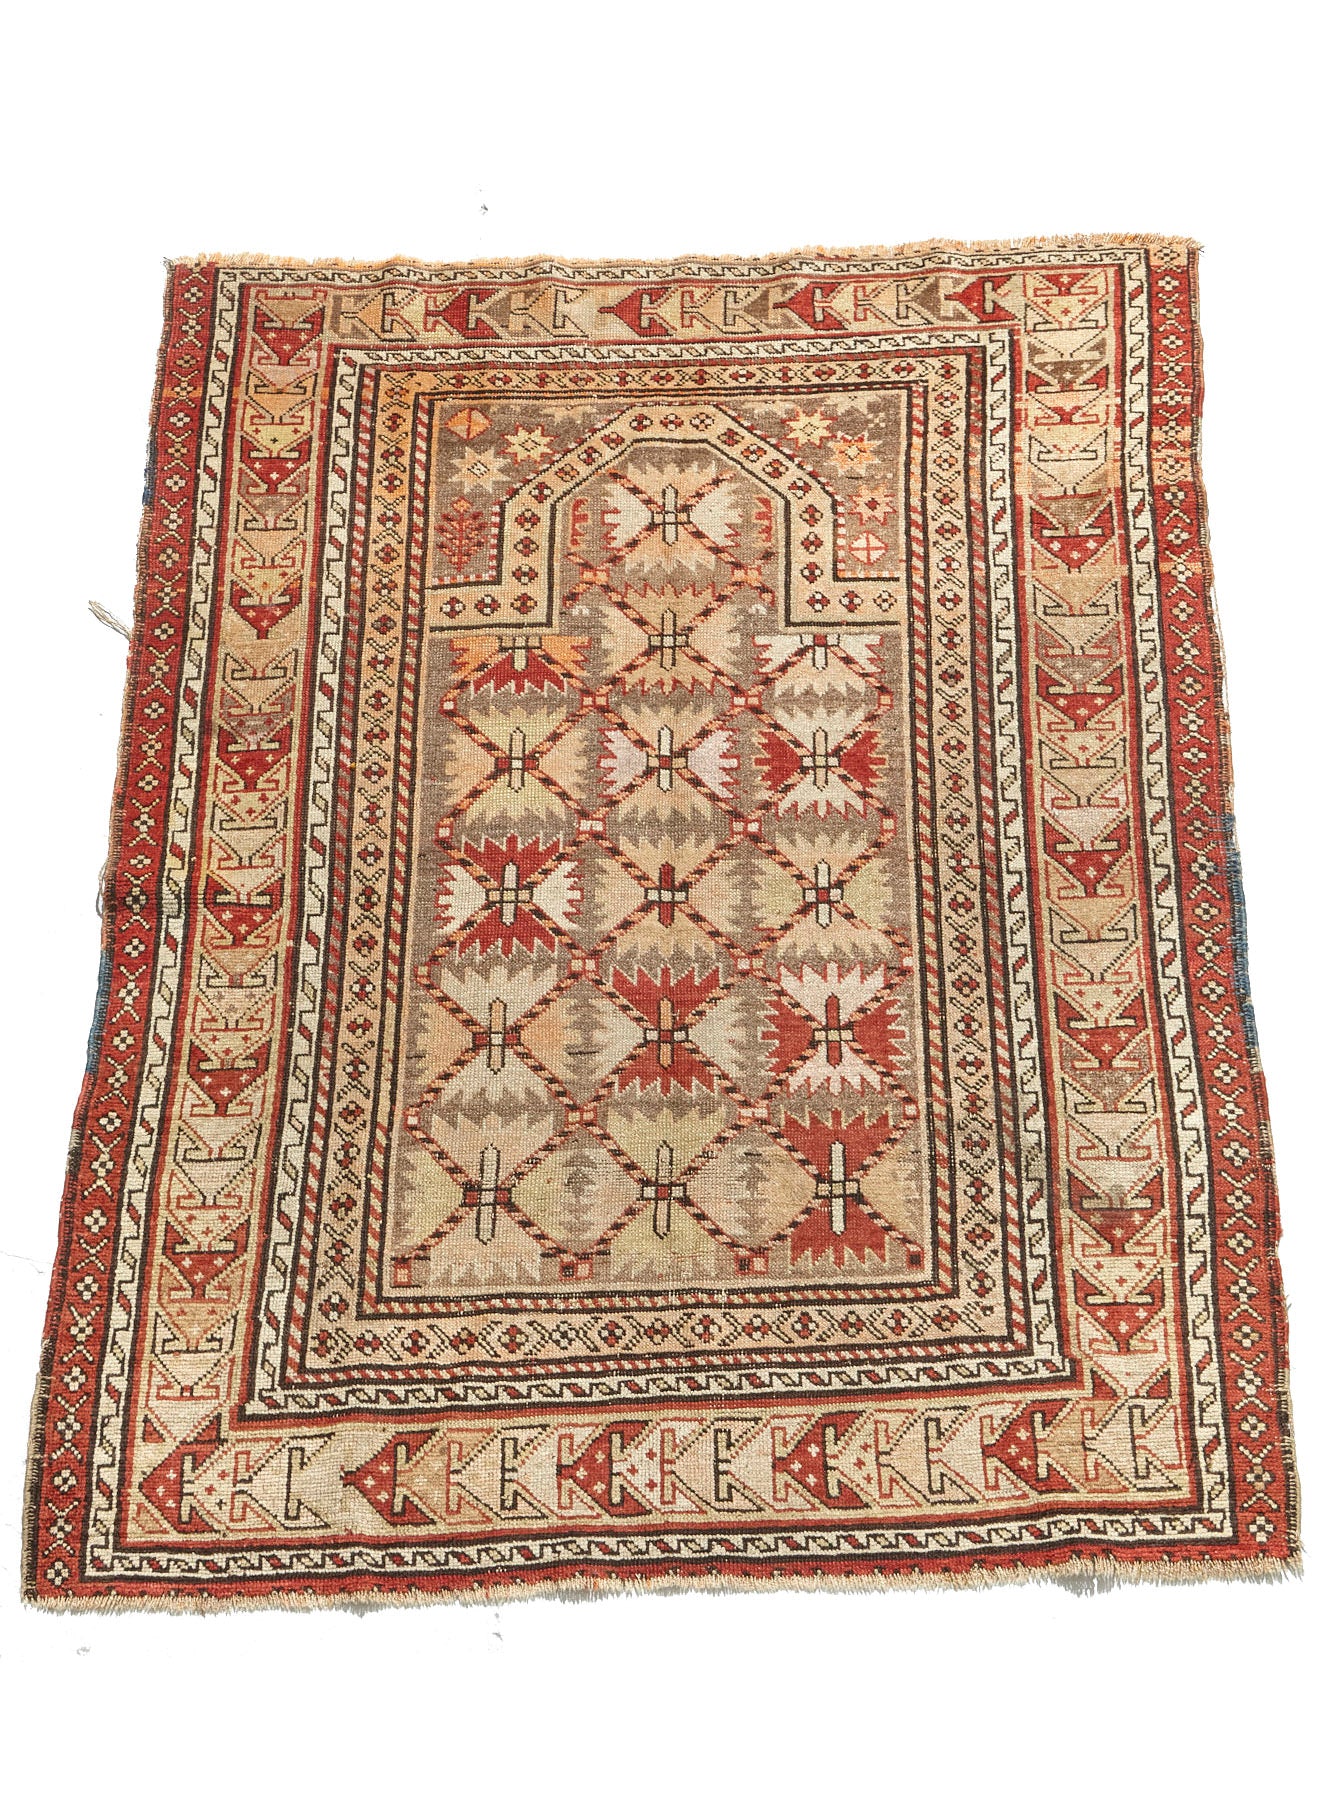 Beautiful neutrals in this hand woven antique Shirvan Prayer rug, beige tan base with red, peach and brown designs throughout. Perfect for a bedroom, office, living room or as a wall hanging - Available from King Kennedy Rugs Los Angeles 